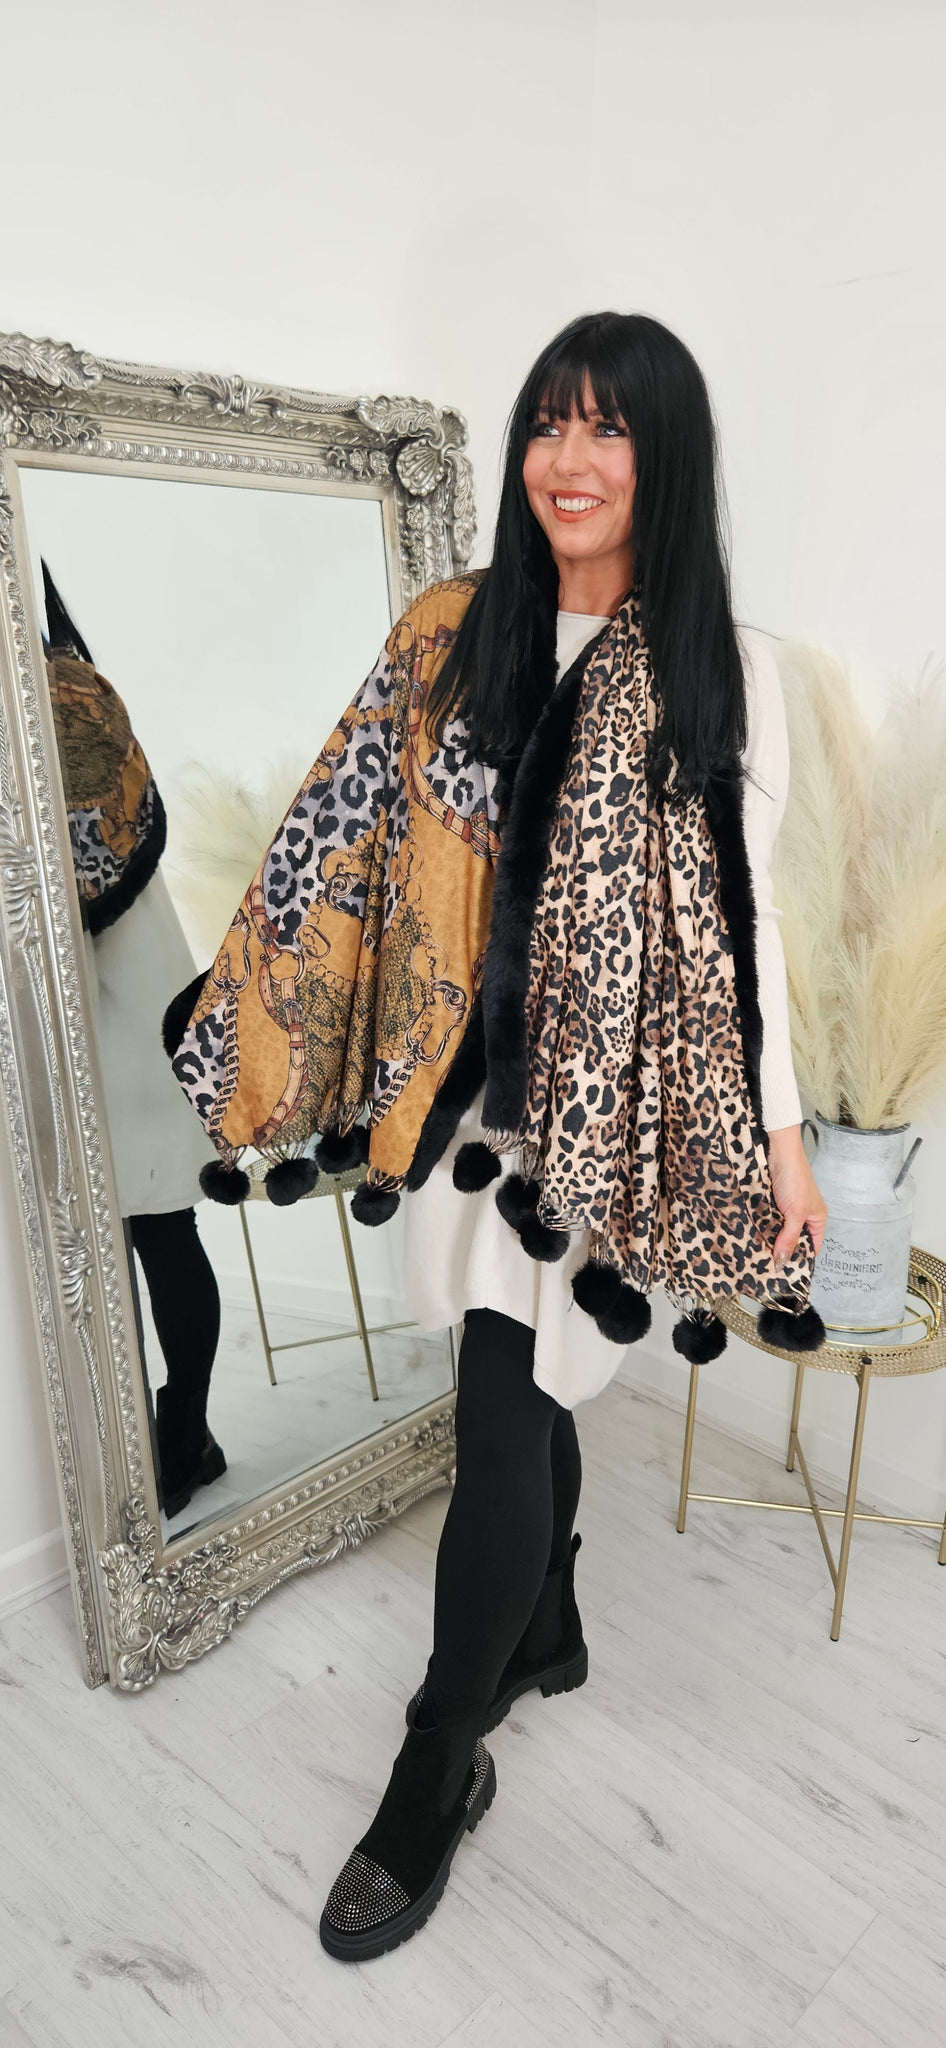 Oslo Chain Print and Leopard Print Scarf/Pashmina - Choose your colour